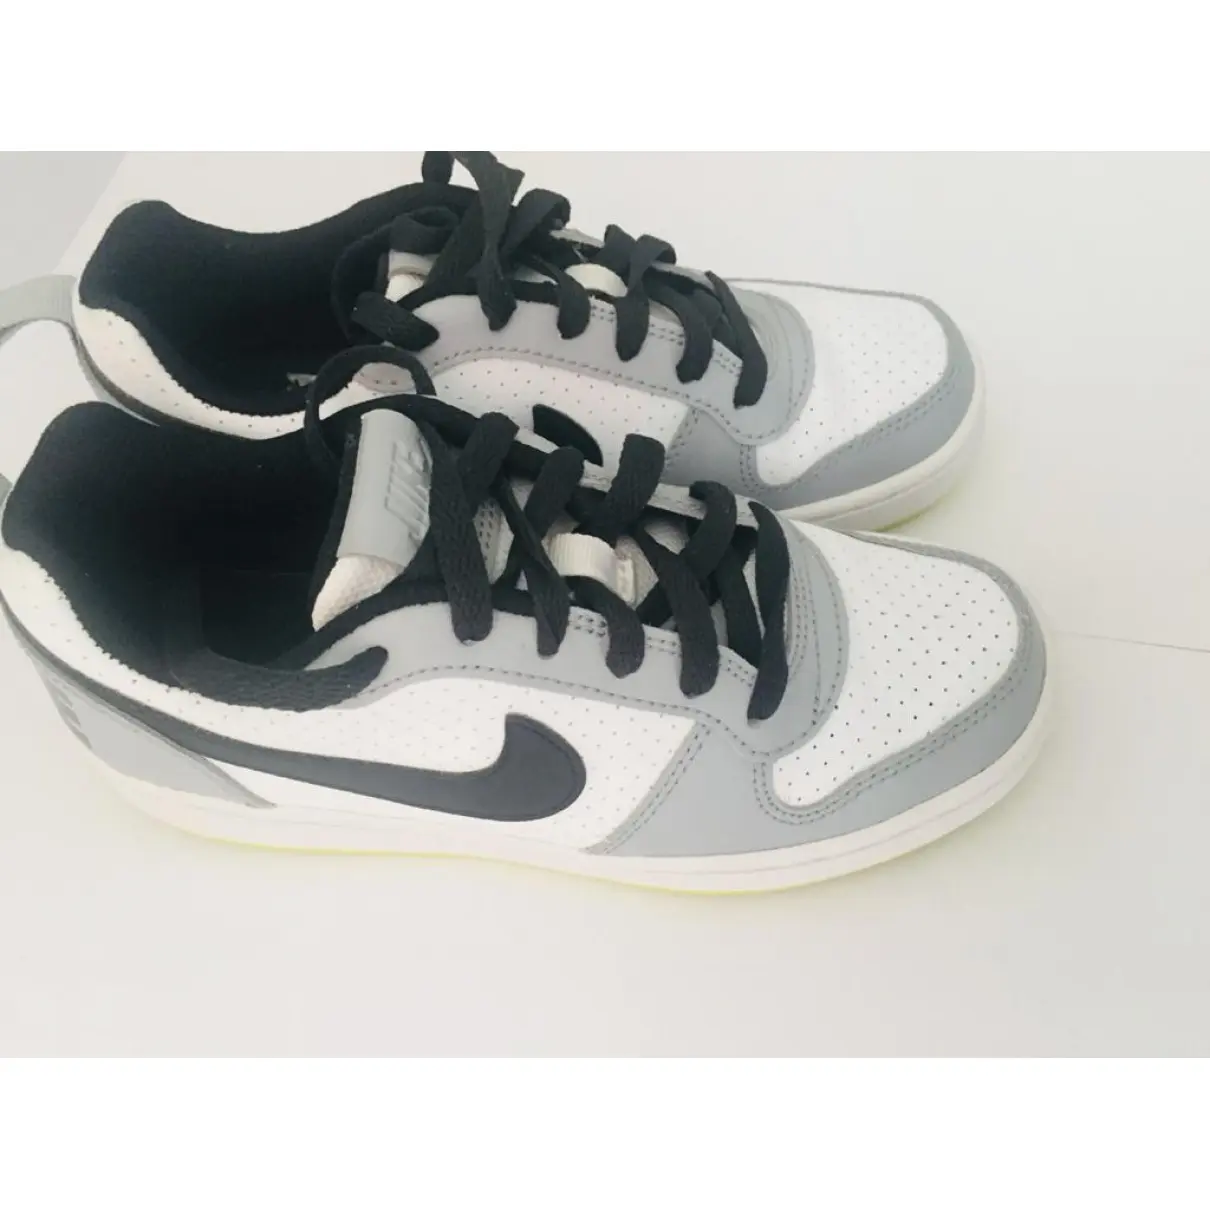 Nike SB Dunk  leather trainers for sale - Vintage